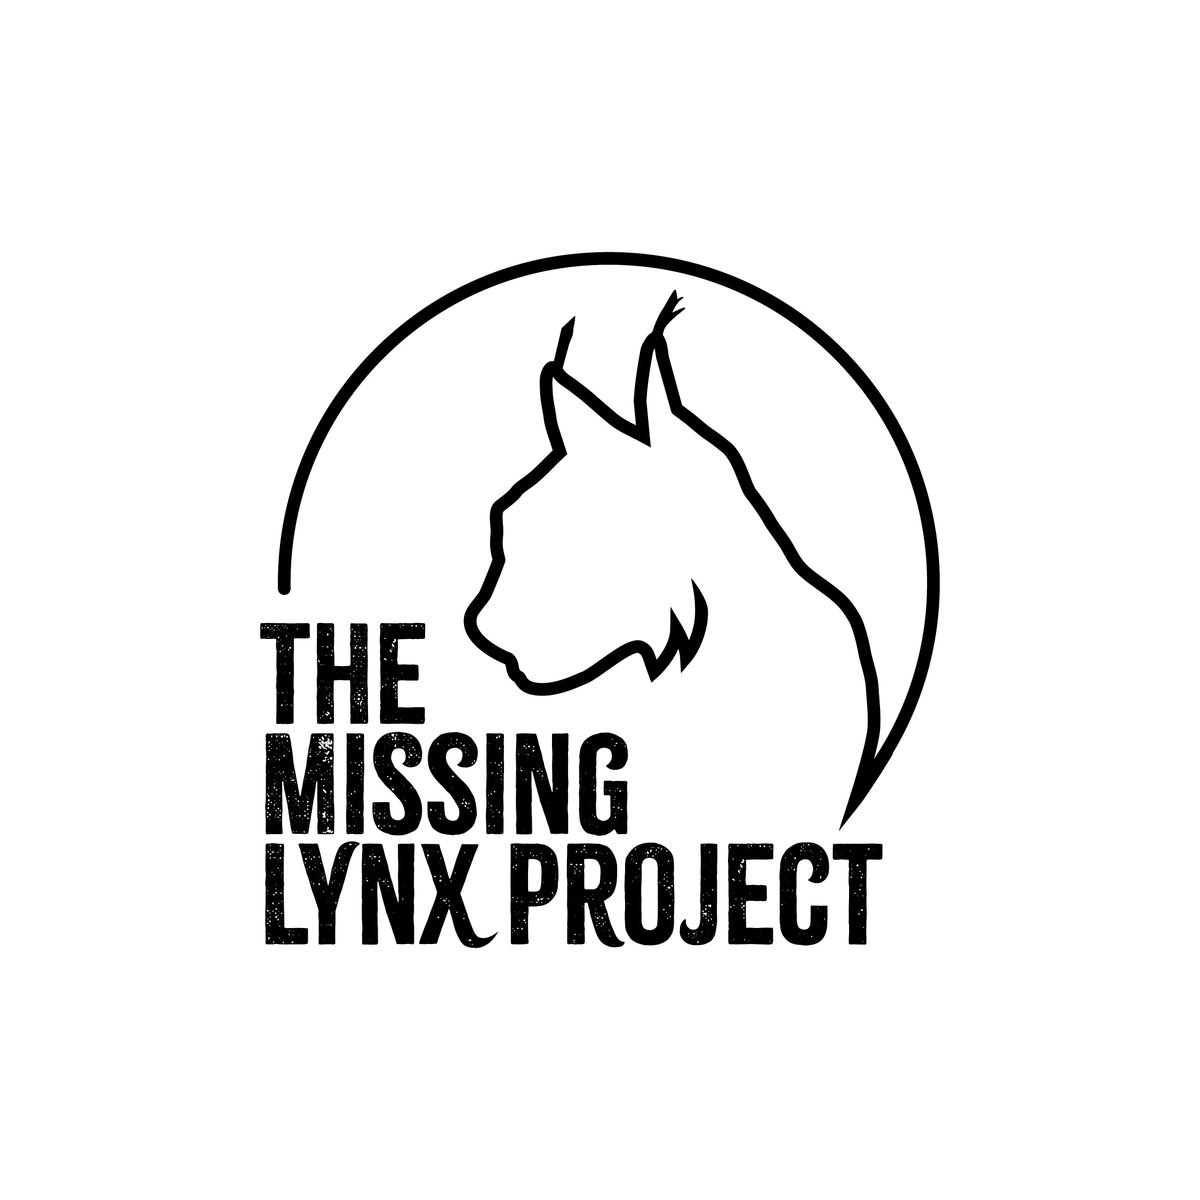 The Missing Lynx Project - Hexham Abbey community workshop 17:30 - 19:30